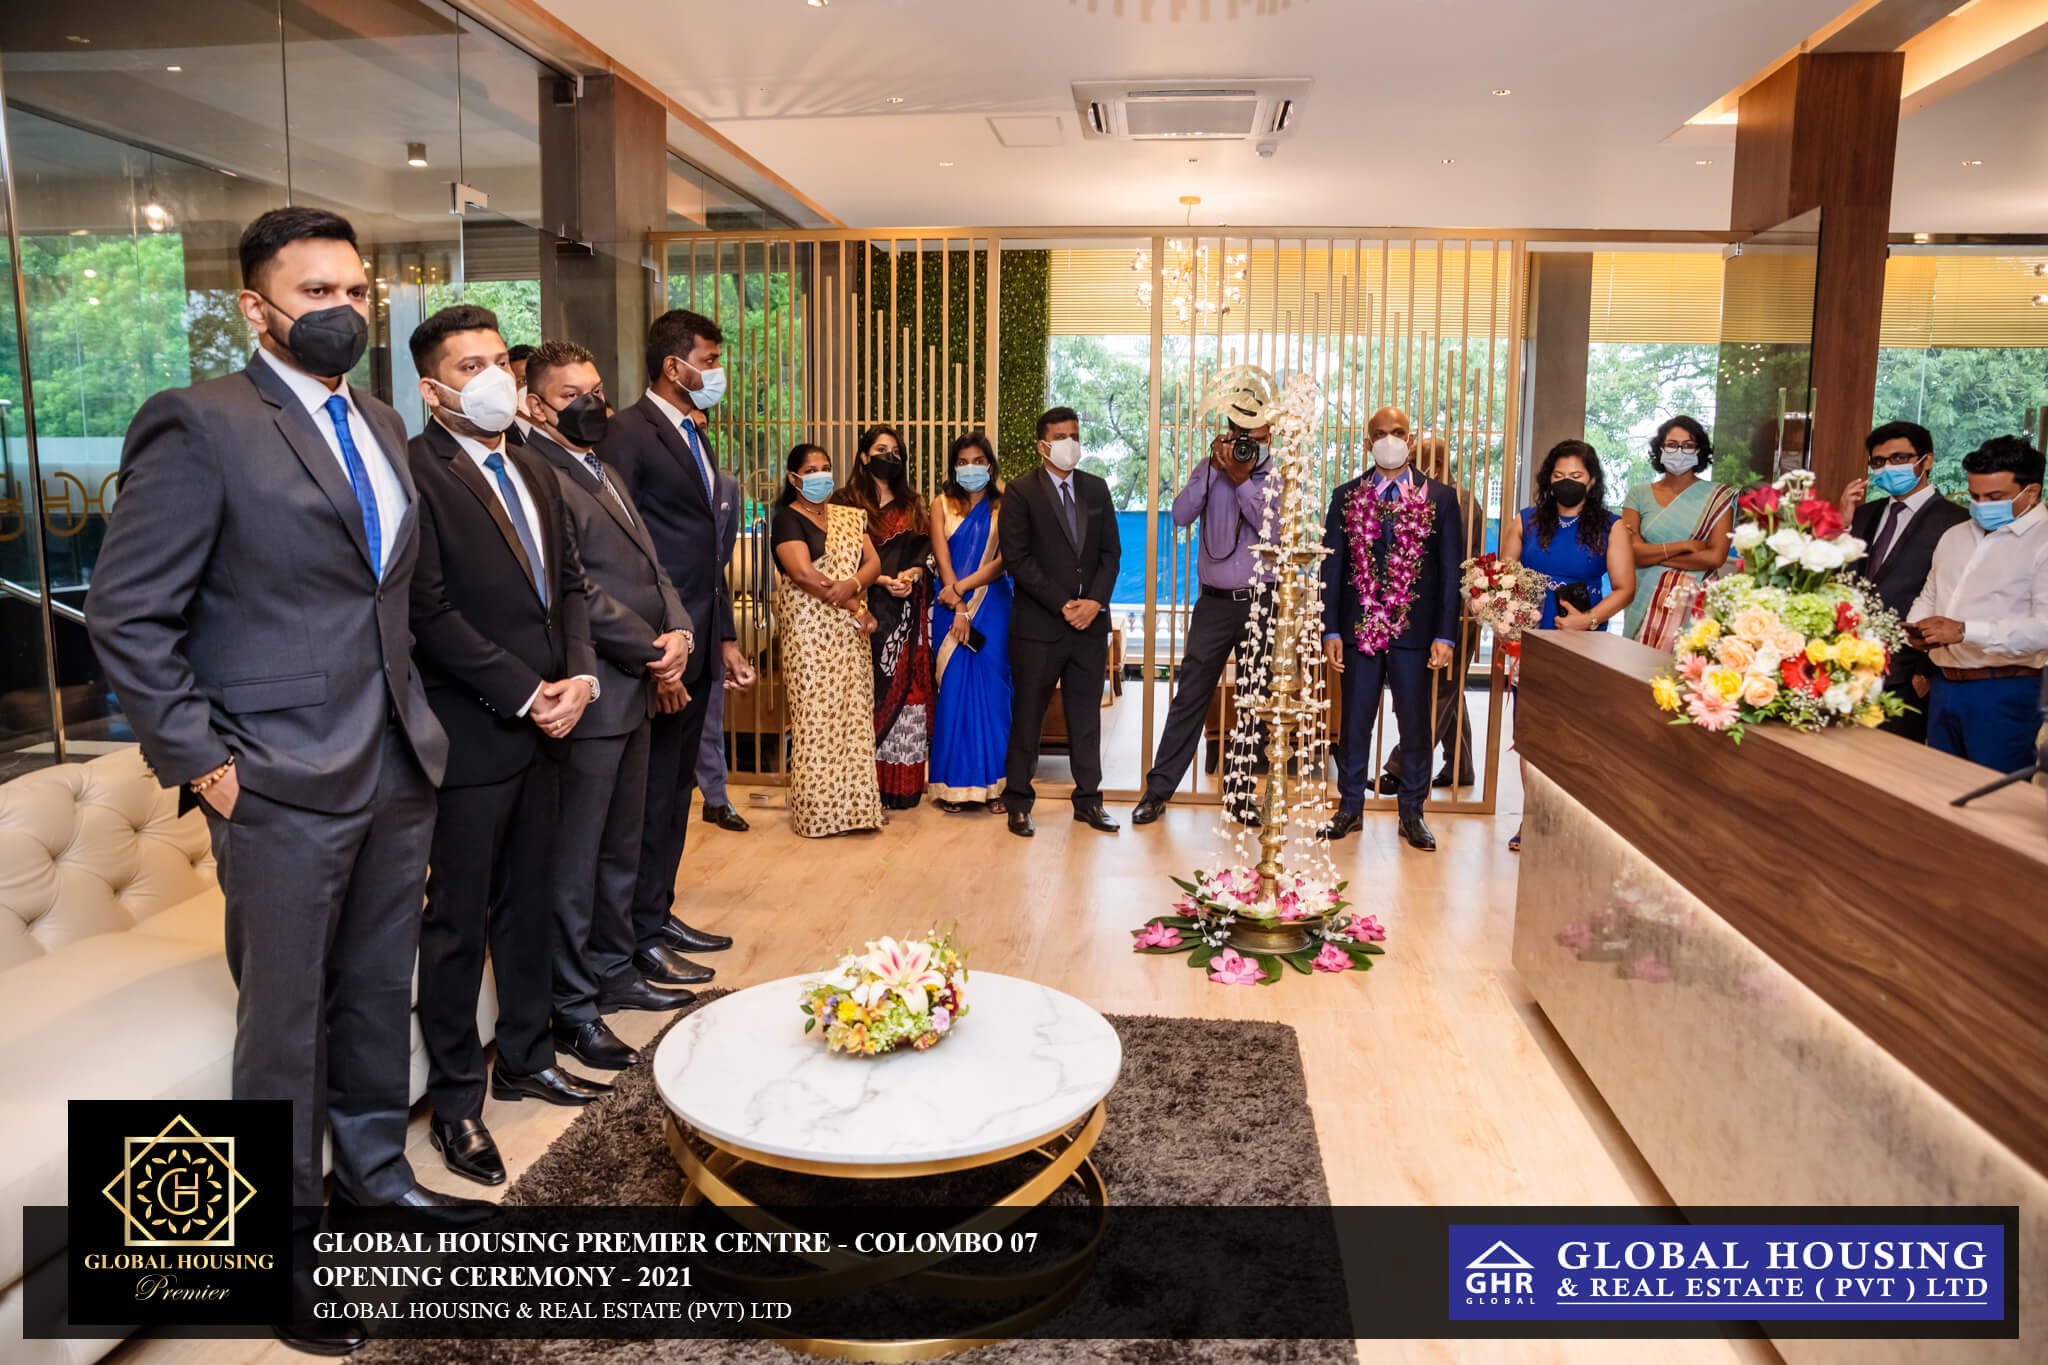 The opening of Global House Premier center